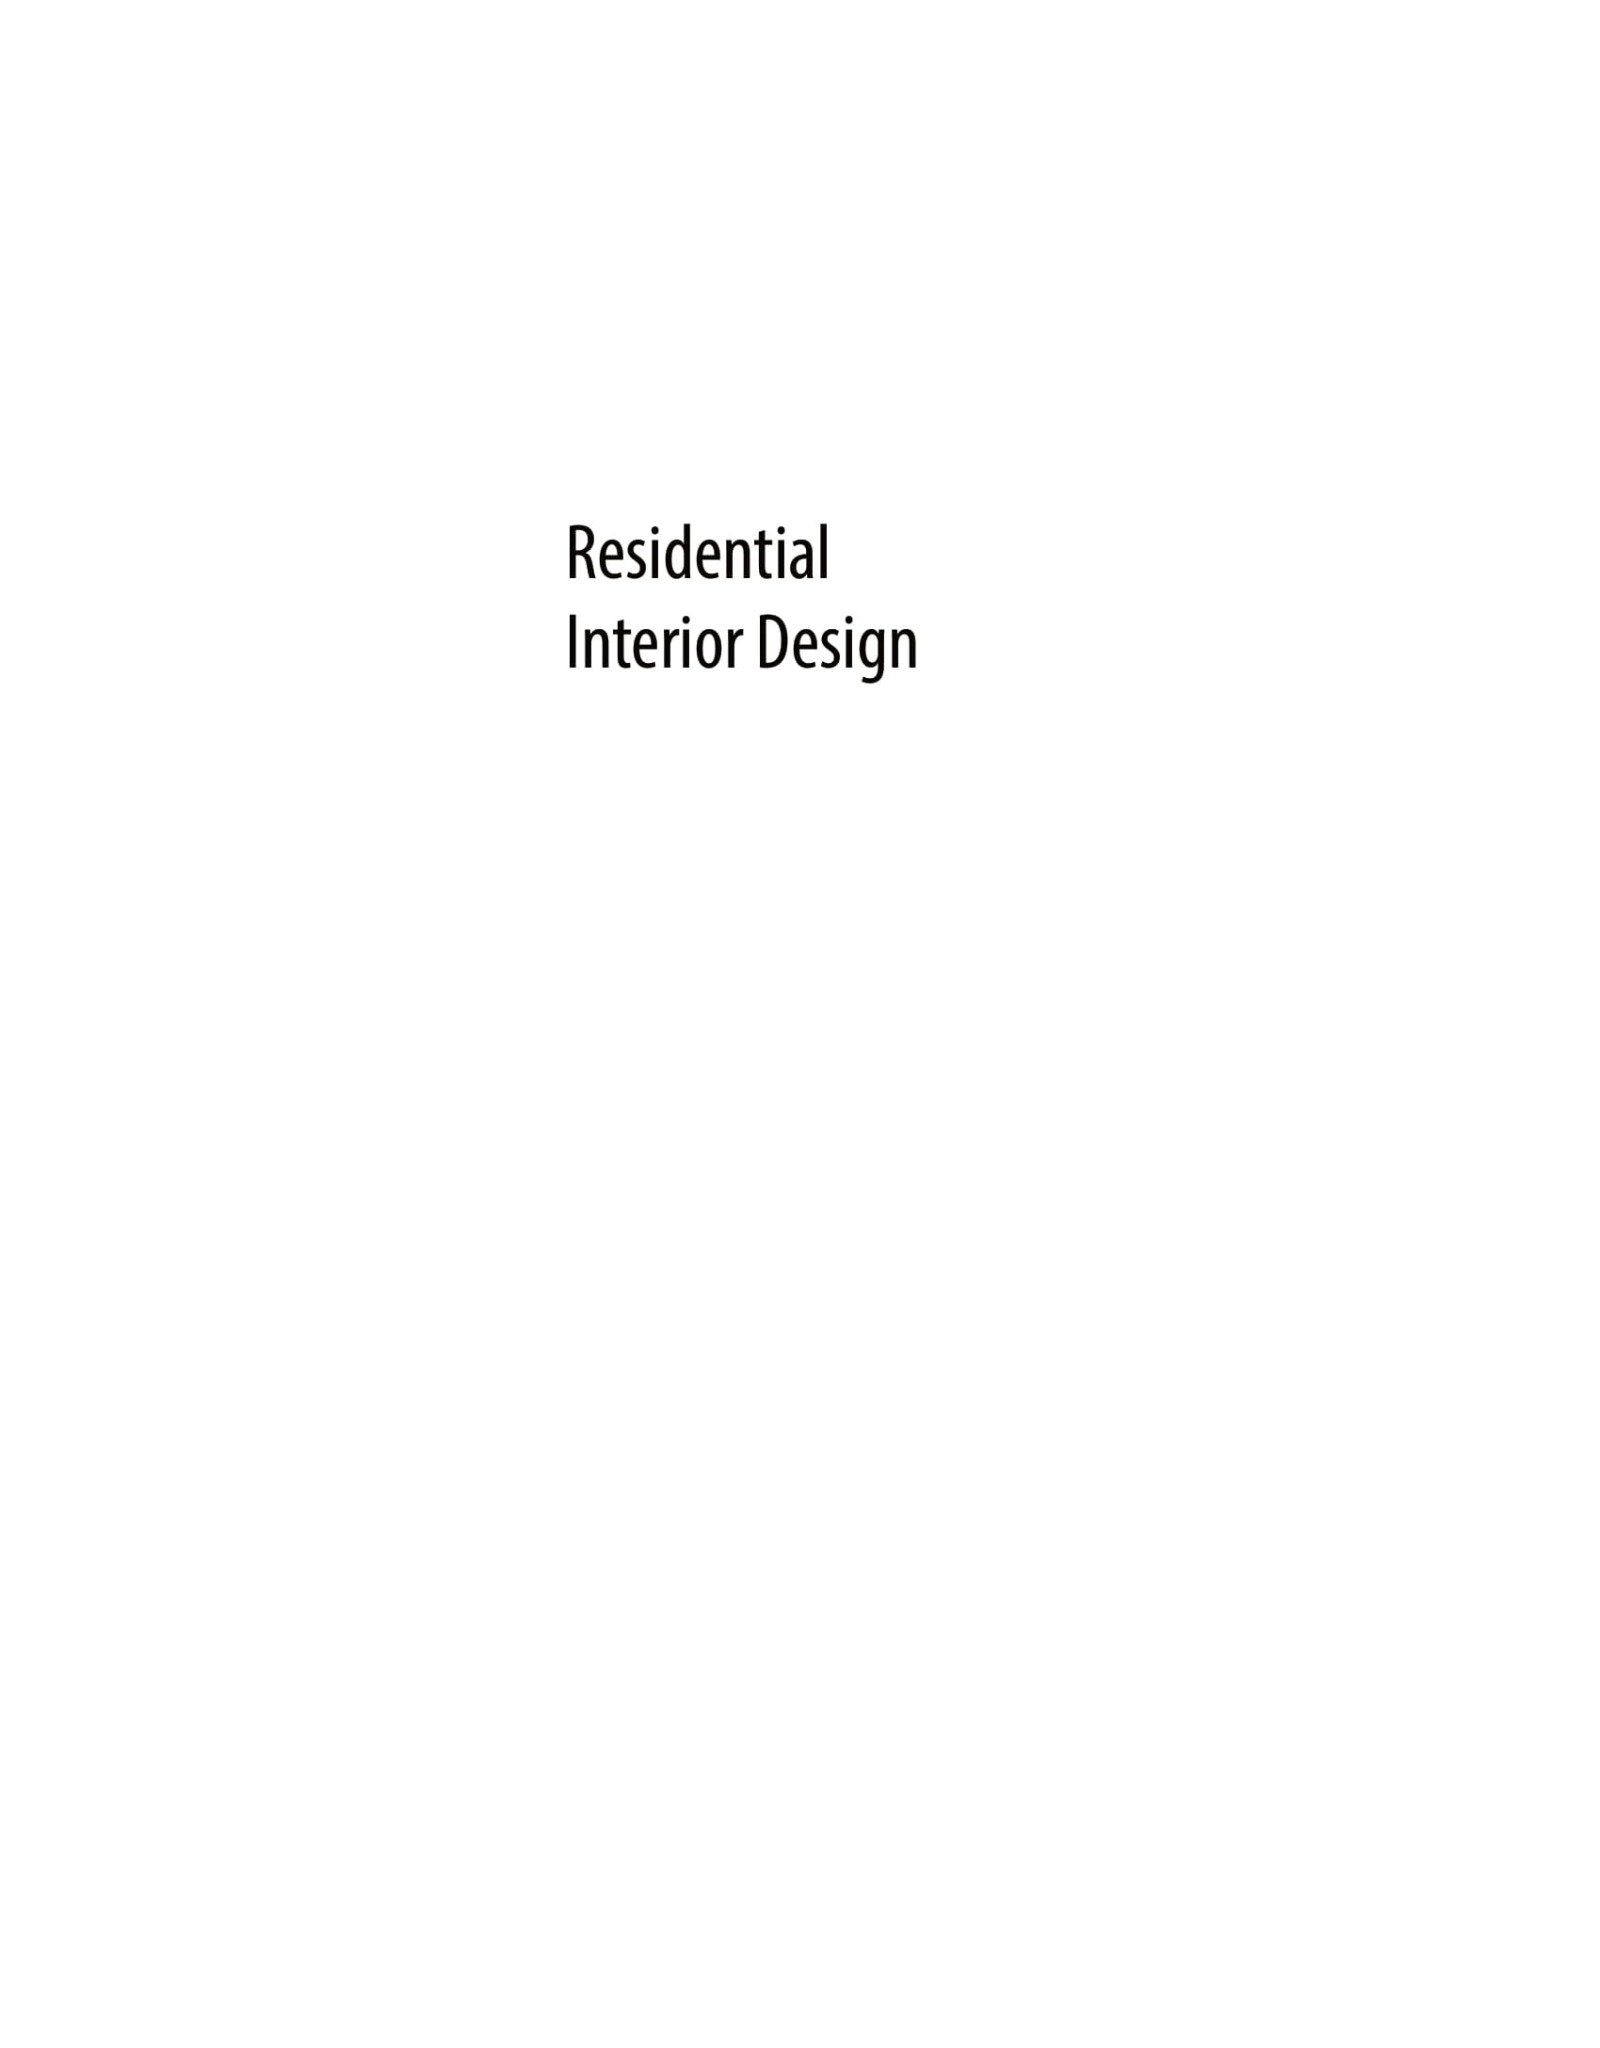 Residential Interior Design A Guide To Planning Spaces 4th Edition E